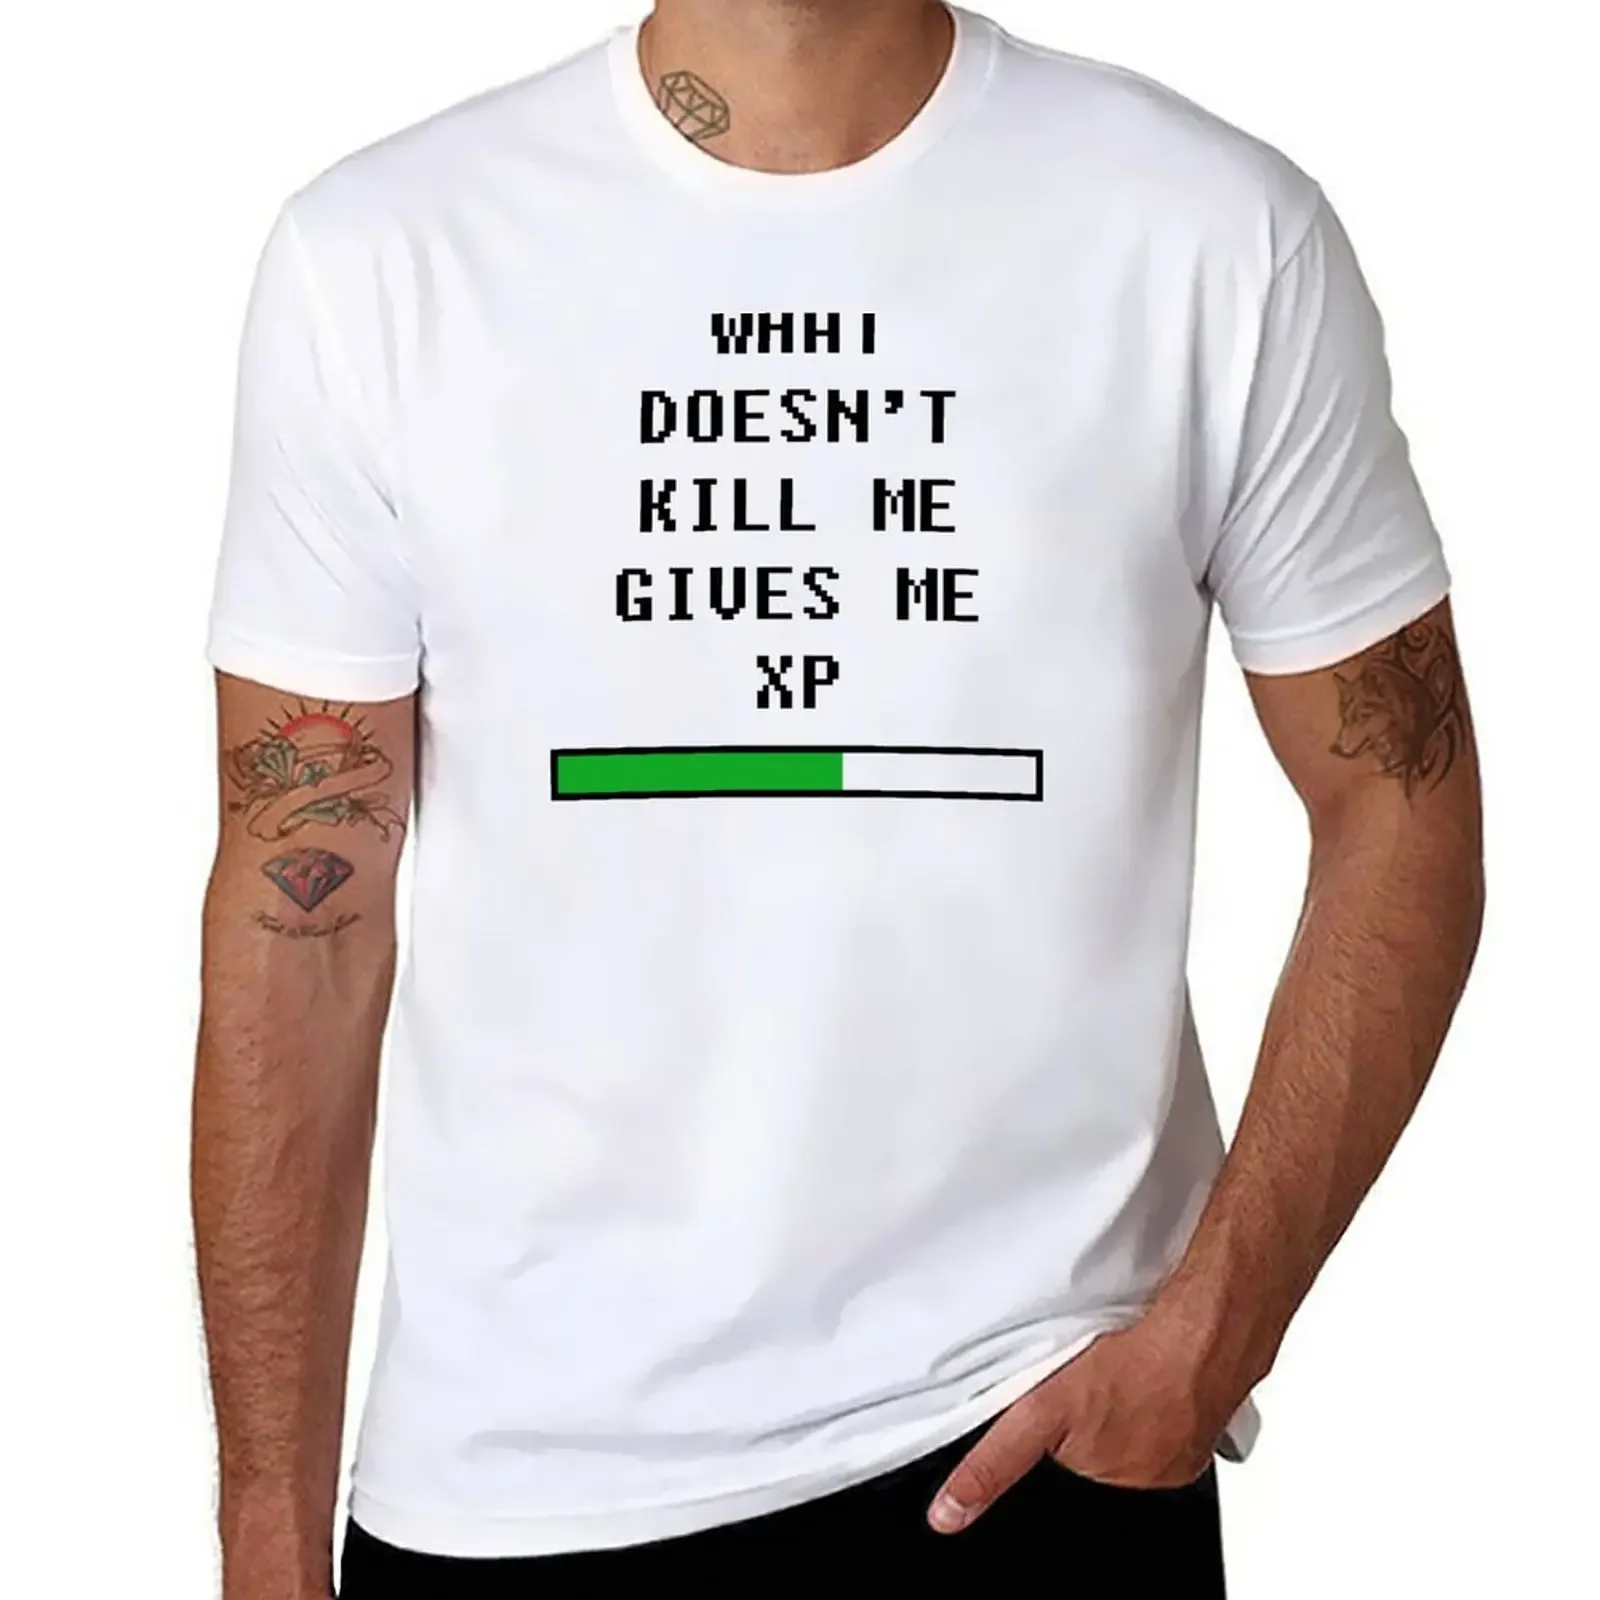 

What doesn't kill me, gives me xp (black) T-Shirt graphics summer top mens white t shirts